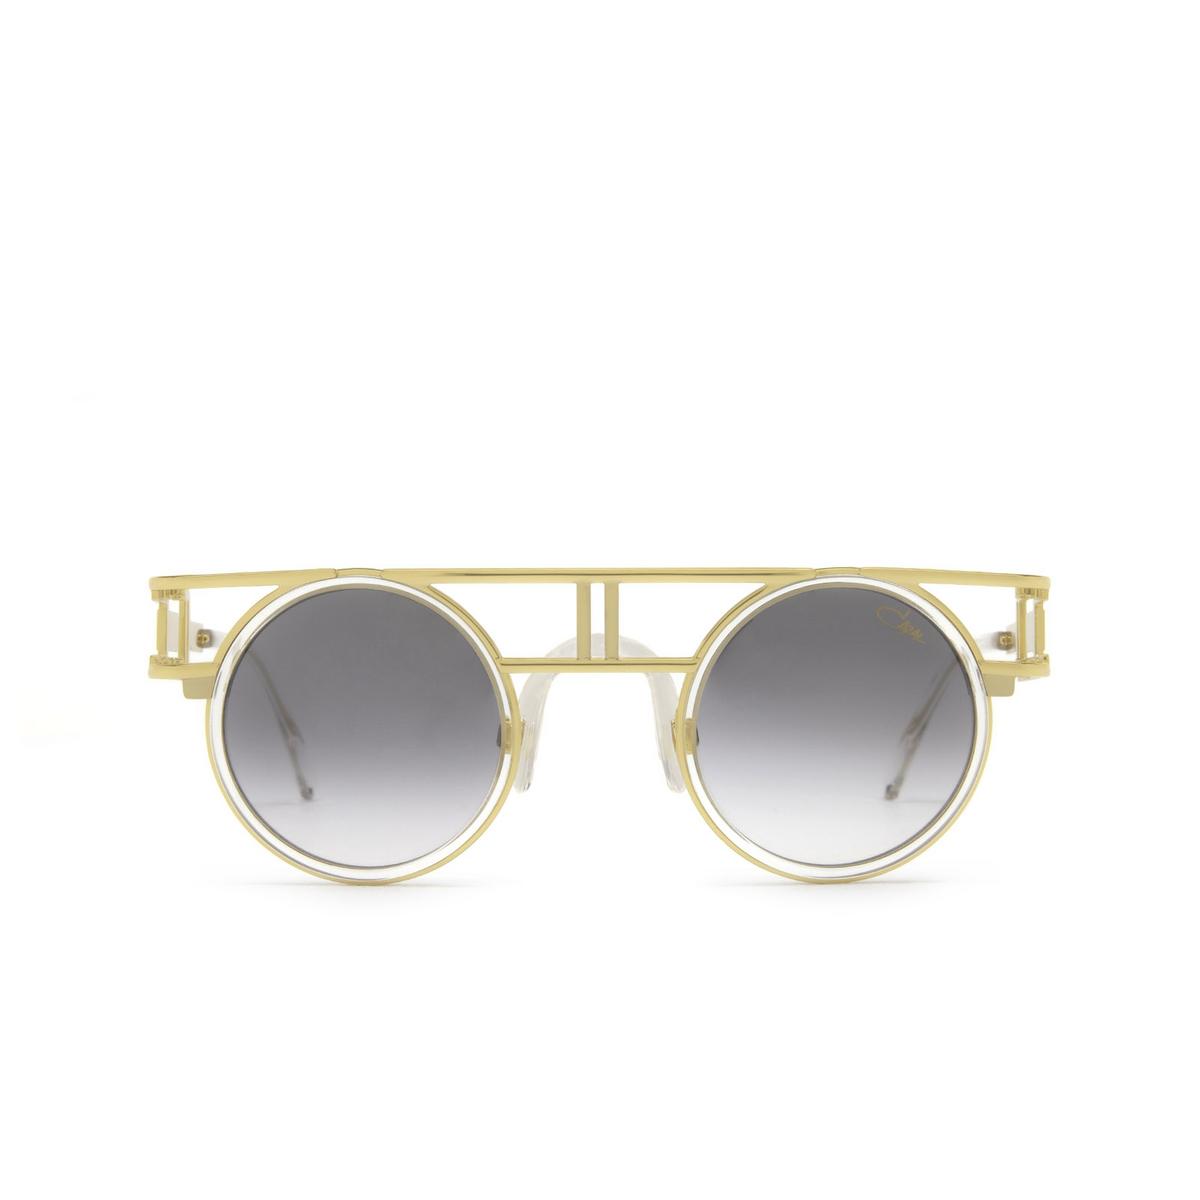 Cazal 668/3 Sunglasses 065 Crystal - Bicolour - front view